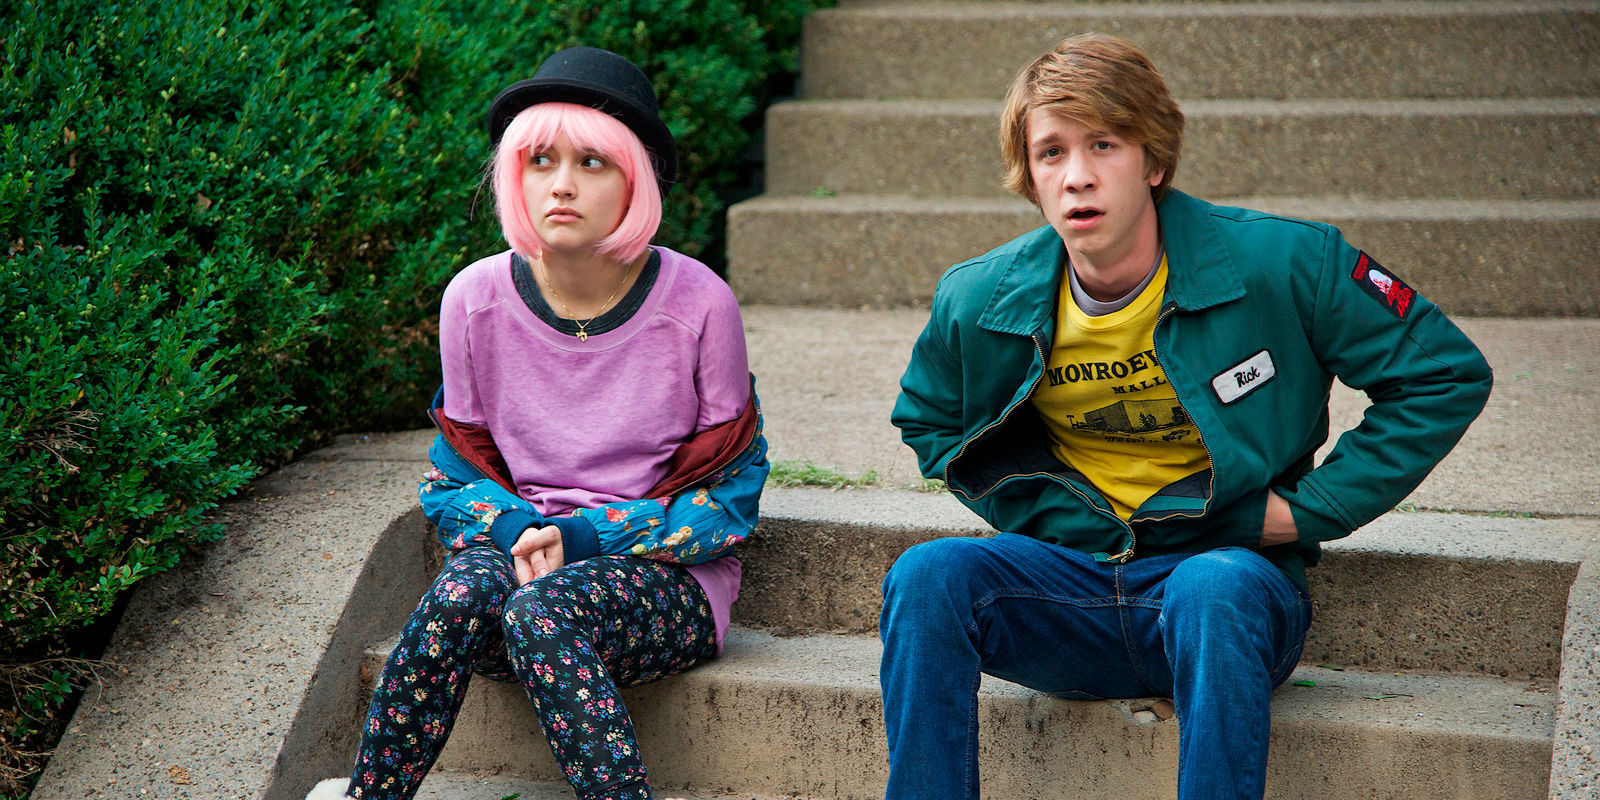 Me And Earl And The Dying Girl HD wallpapers, Desktop wallpaper - most viewed